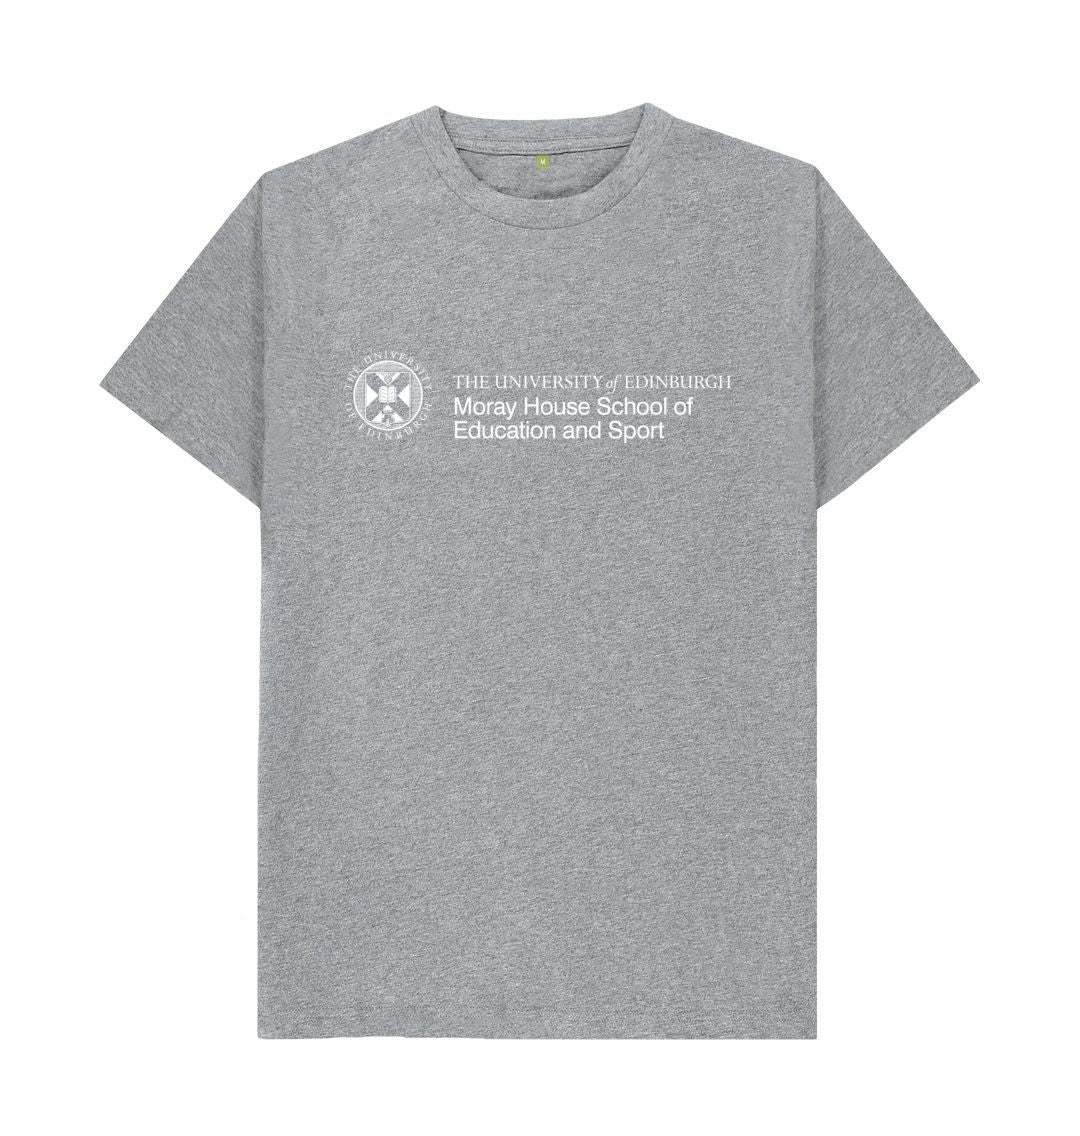 Athletic Grey Moray House School of Education and Sport T-Shirt